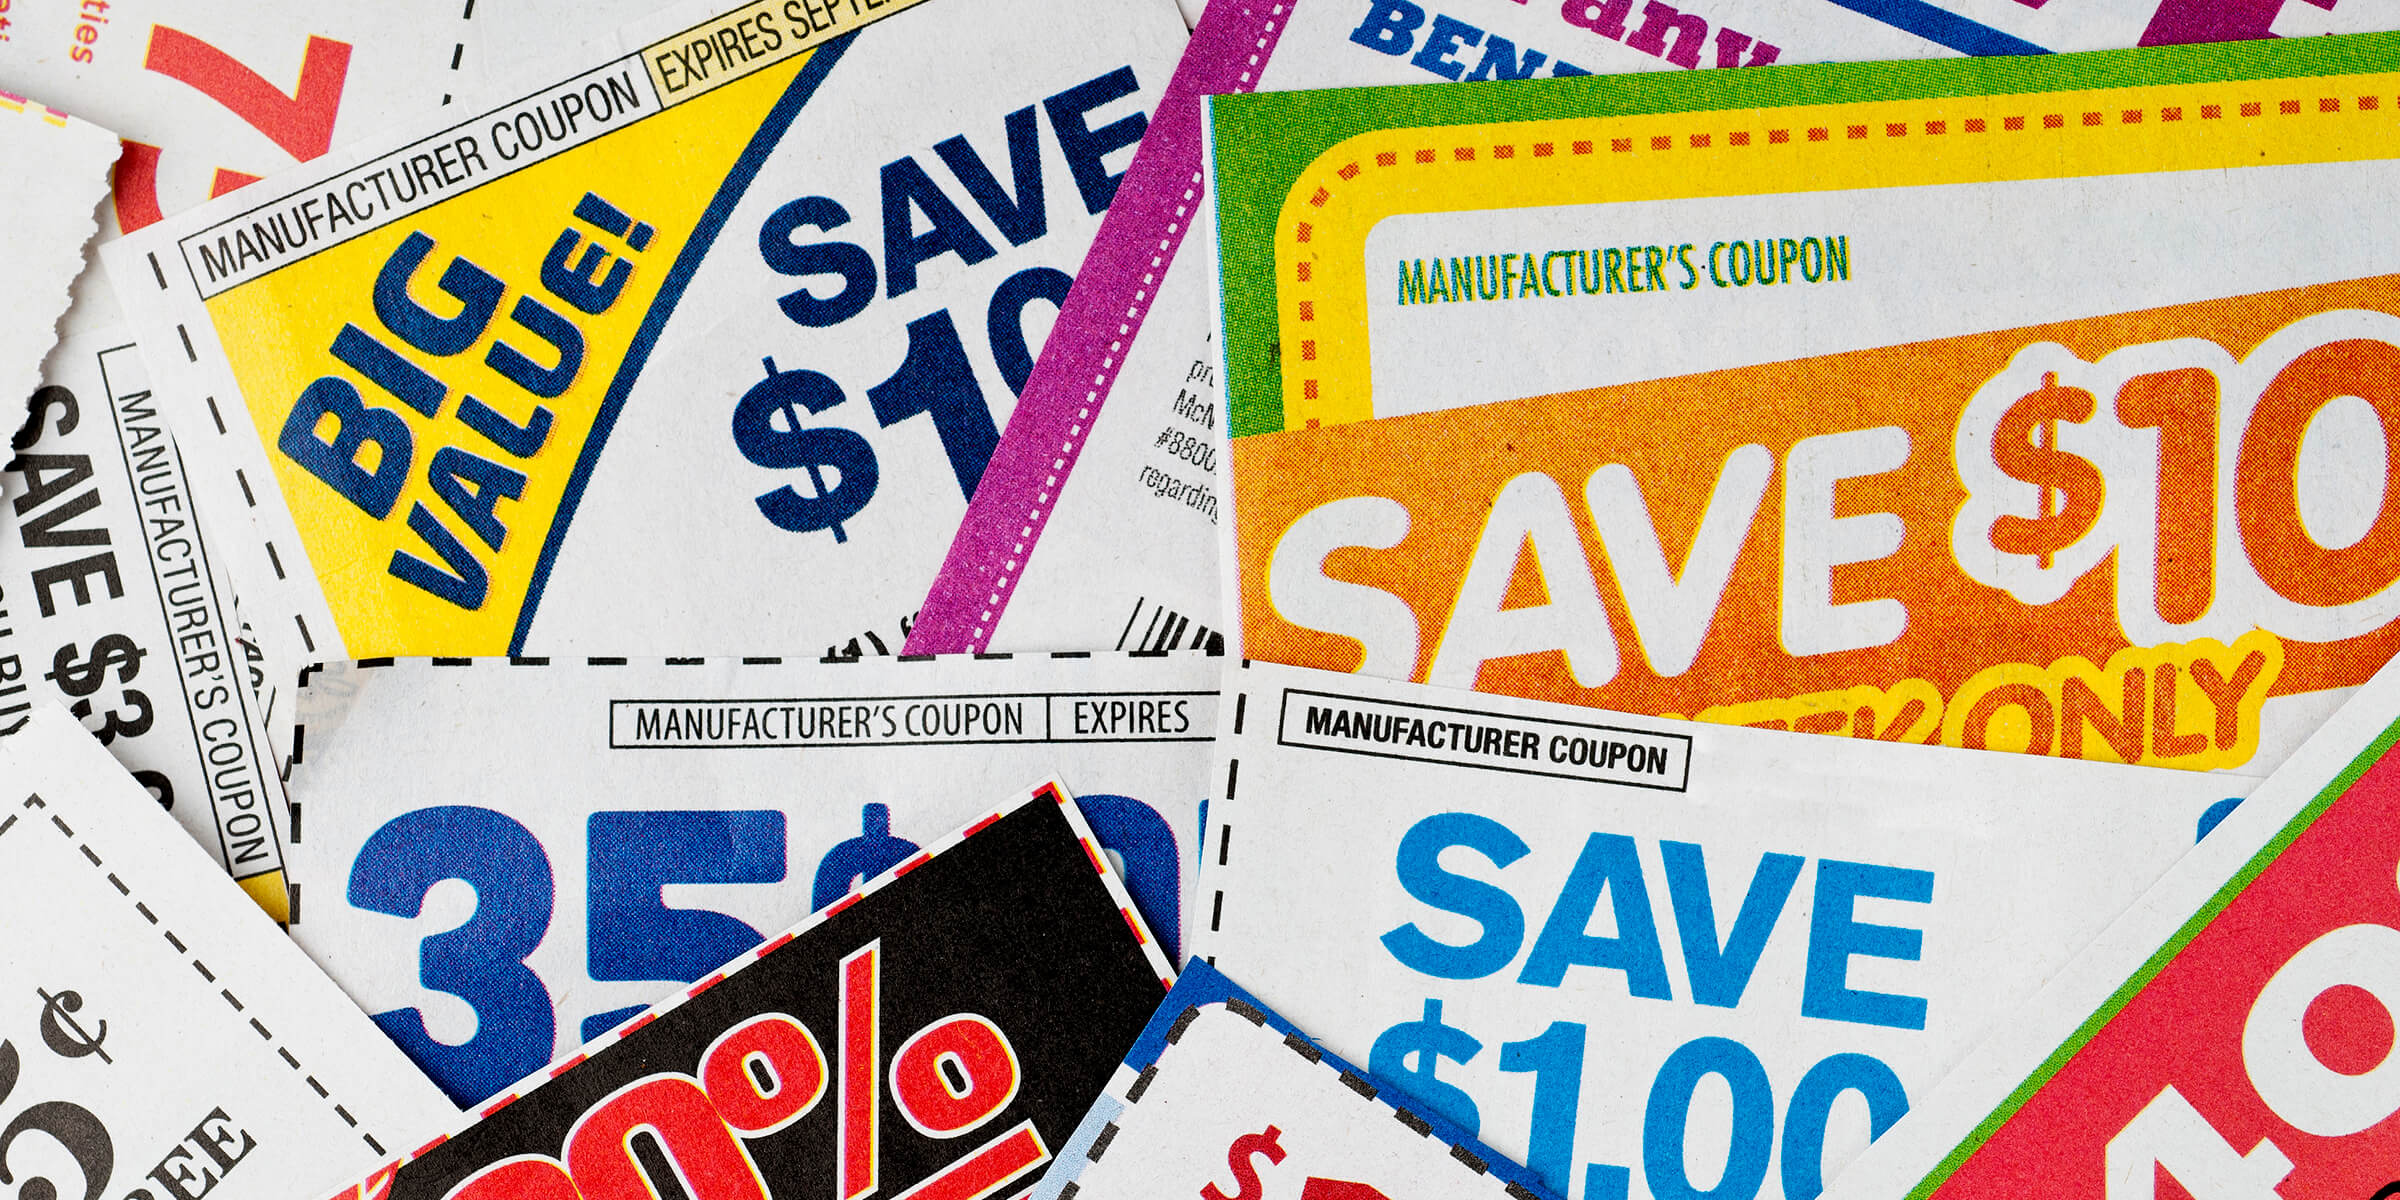 Coupons are designed on Printful.